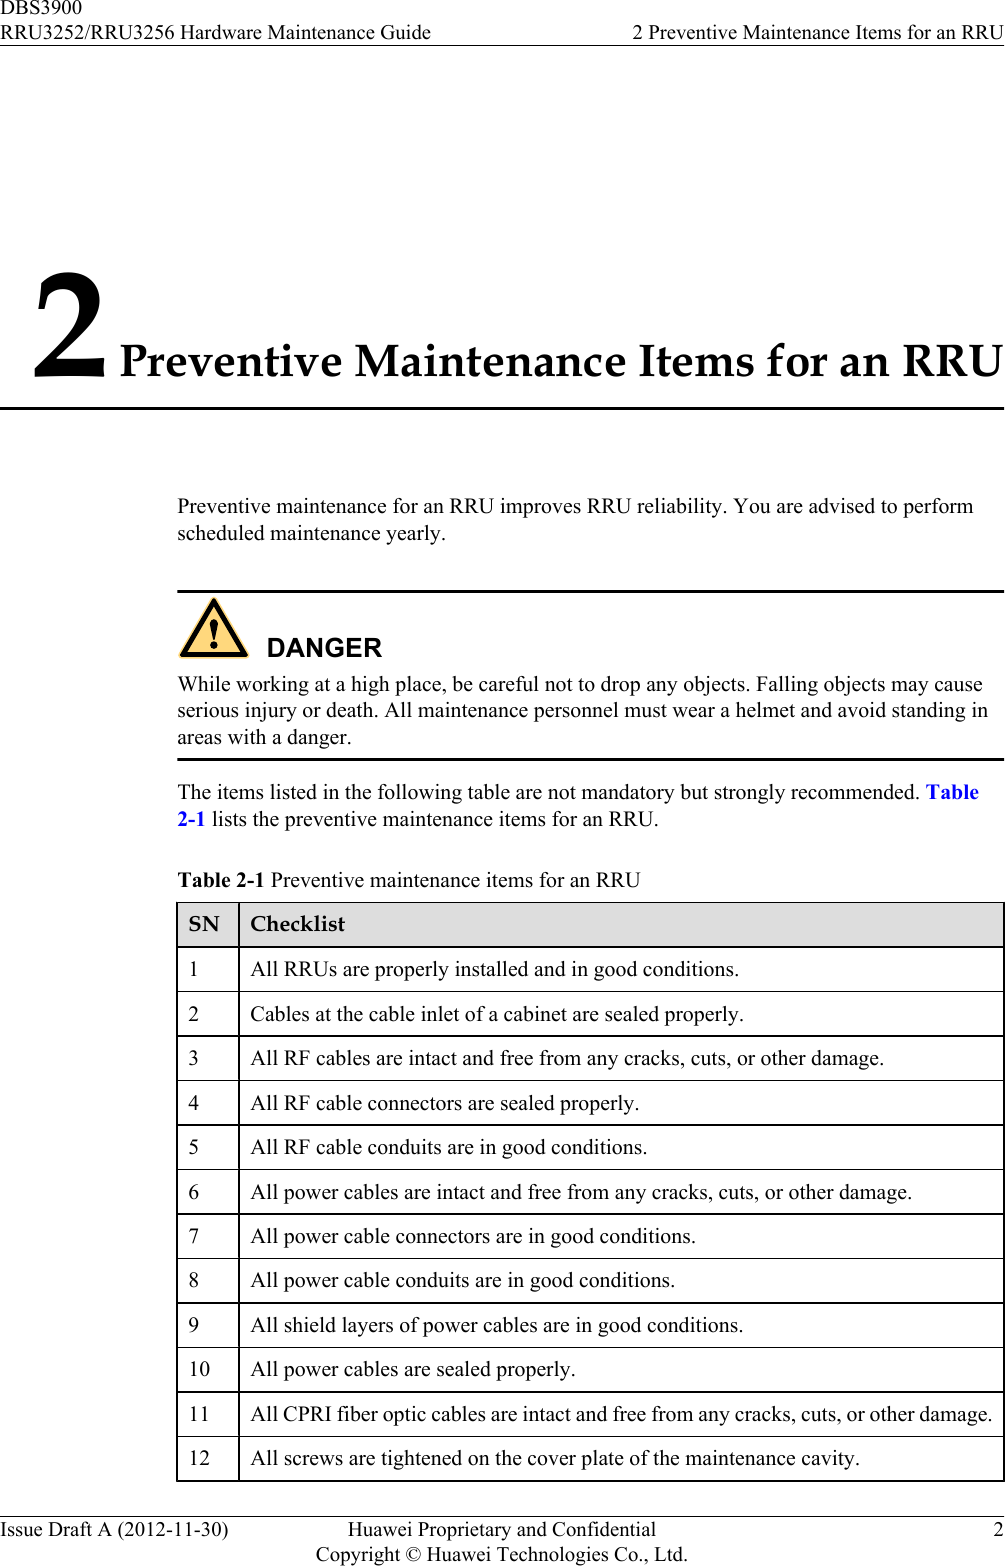 2 Preventive Maintenance Items for an RRUPreventive maintenance for an RRU improves RRU reliability. You are advised to performscheduled maintenance yearly.DANGERWhile working at a high place, be careful not to drop any objects. Falling objects may causeserious injury or death. All maintenance personnel must wear a helmet and avoid standing inareas with a danger.The items listed in the following table are not mandatory but strongly recommended. Table2-1 lists the preventive maintenance items for an RRU.Table 2-1 Preventive maintenance items for an RRUSN Checklist1All RRUs are properly installed and in good conditions.2 Cables at the cable inlet of a cabinet are sealed properly.3 All RF cables are intact and free from any cracks, cuts, or other damage.4 All RF cable connectors are sealed properly.5 All RF cable conduits are in good conditions.6 All power cables are intact and free from any cracks, cuts, or other damage.7 All power cable connectors are in good conditions.8 All power cable conduits are in good conditions.9 All shield layers of power cables are in good conditions.10 All power cables are sealed properly.11 All CPRI fiber optic cables are intact and free from any cracks, cuts, or other damage.12 All screws are tightened on the cover plate of the maintenance cavity.DBS3900RRU3252/RRU3256 Hardware Maintenance Guide 2 Preventive Maintenance Items for an RRUIssue Draft A (2012-11-30) Huawei Proprietary and ConfidentialCopyright © Huawei Technologies Co., Ltd.2